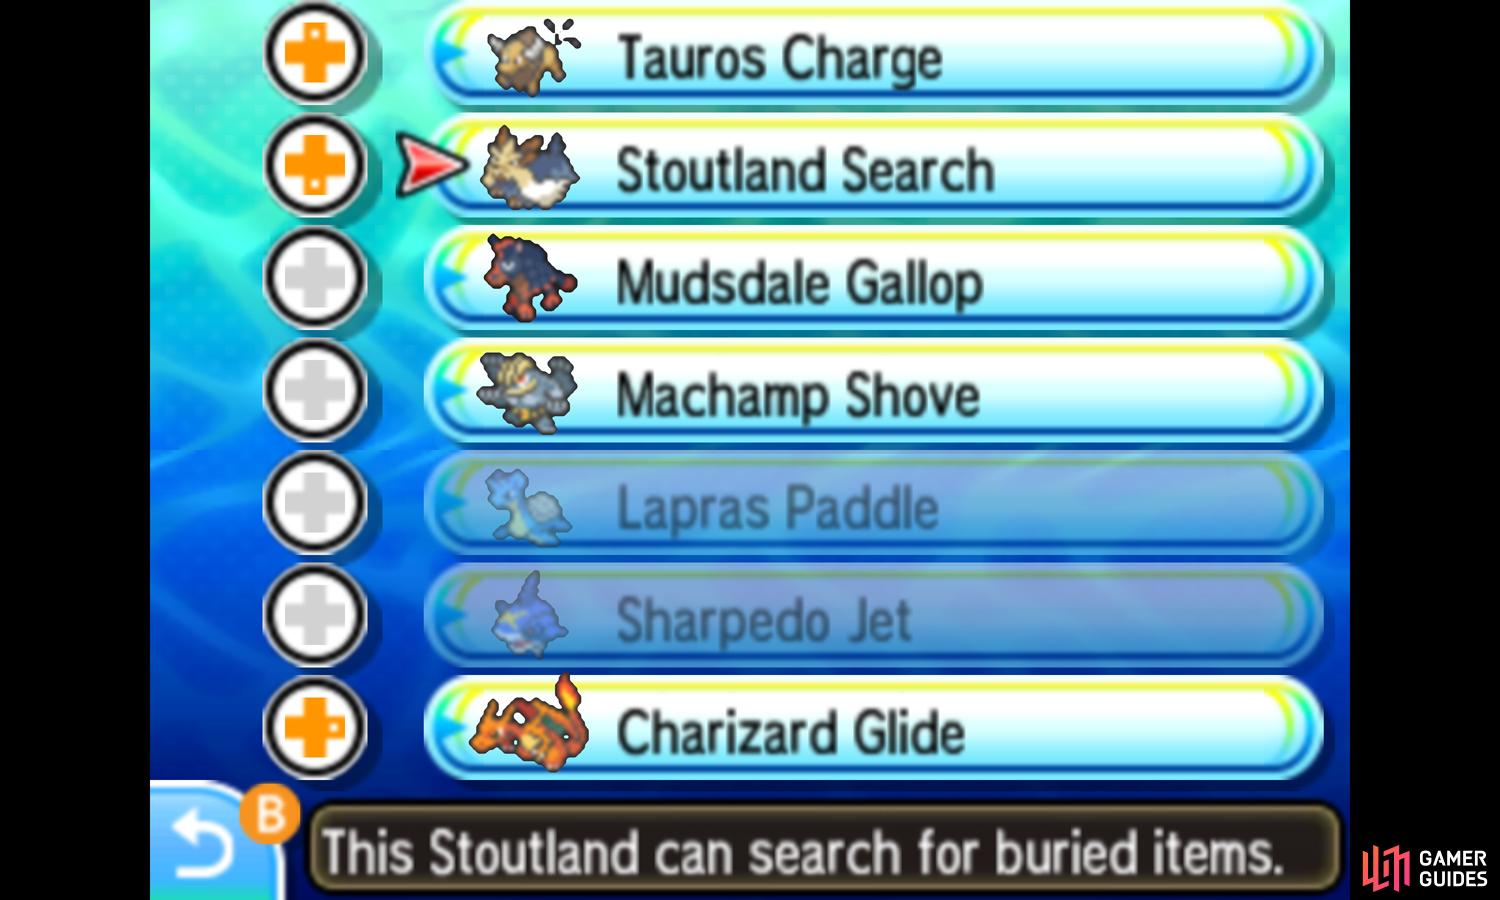 Poké Ride replaces Hidden Machines and similar field items.